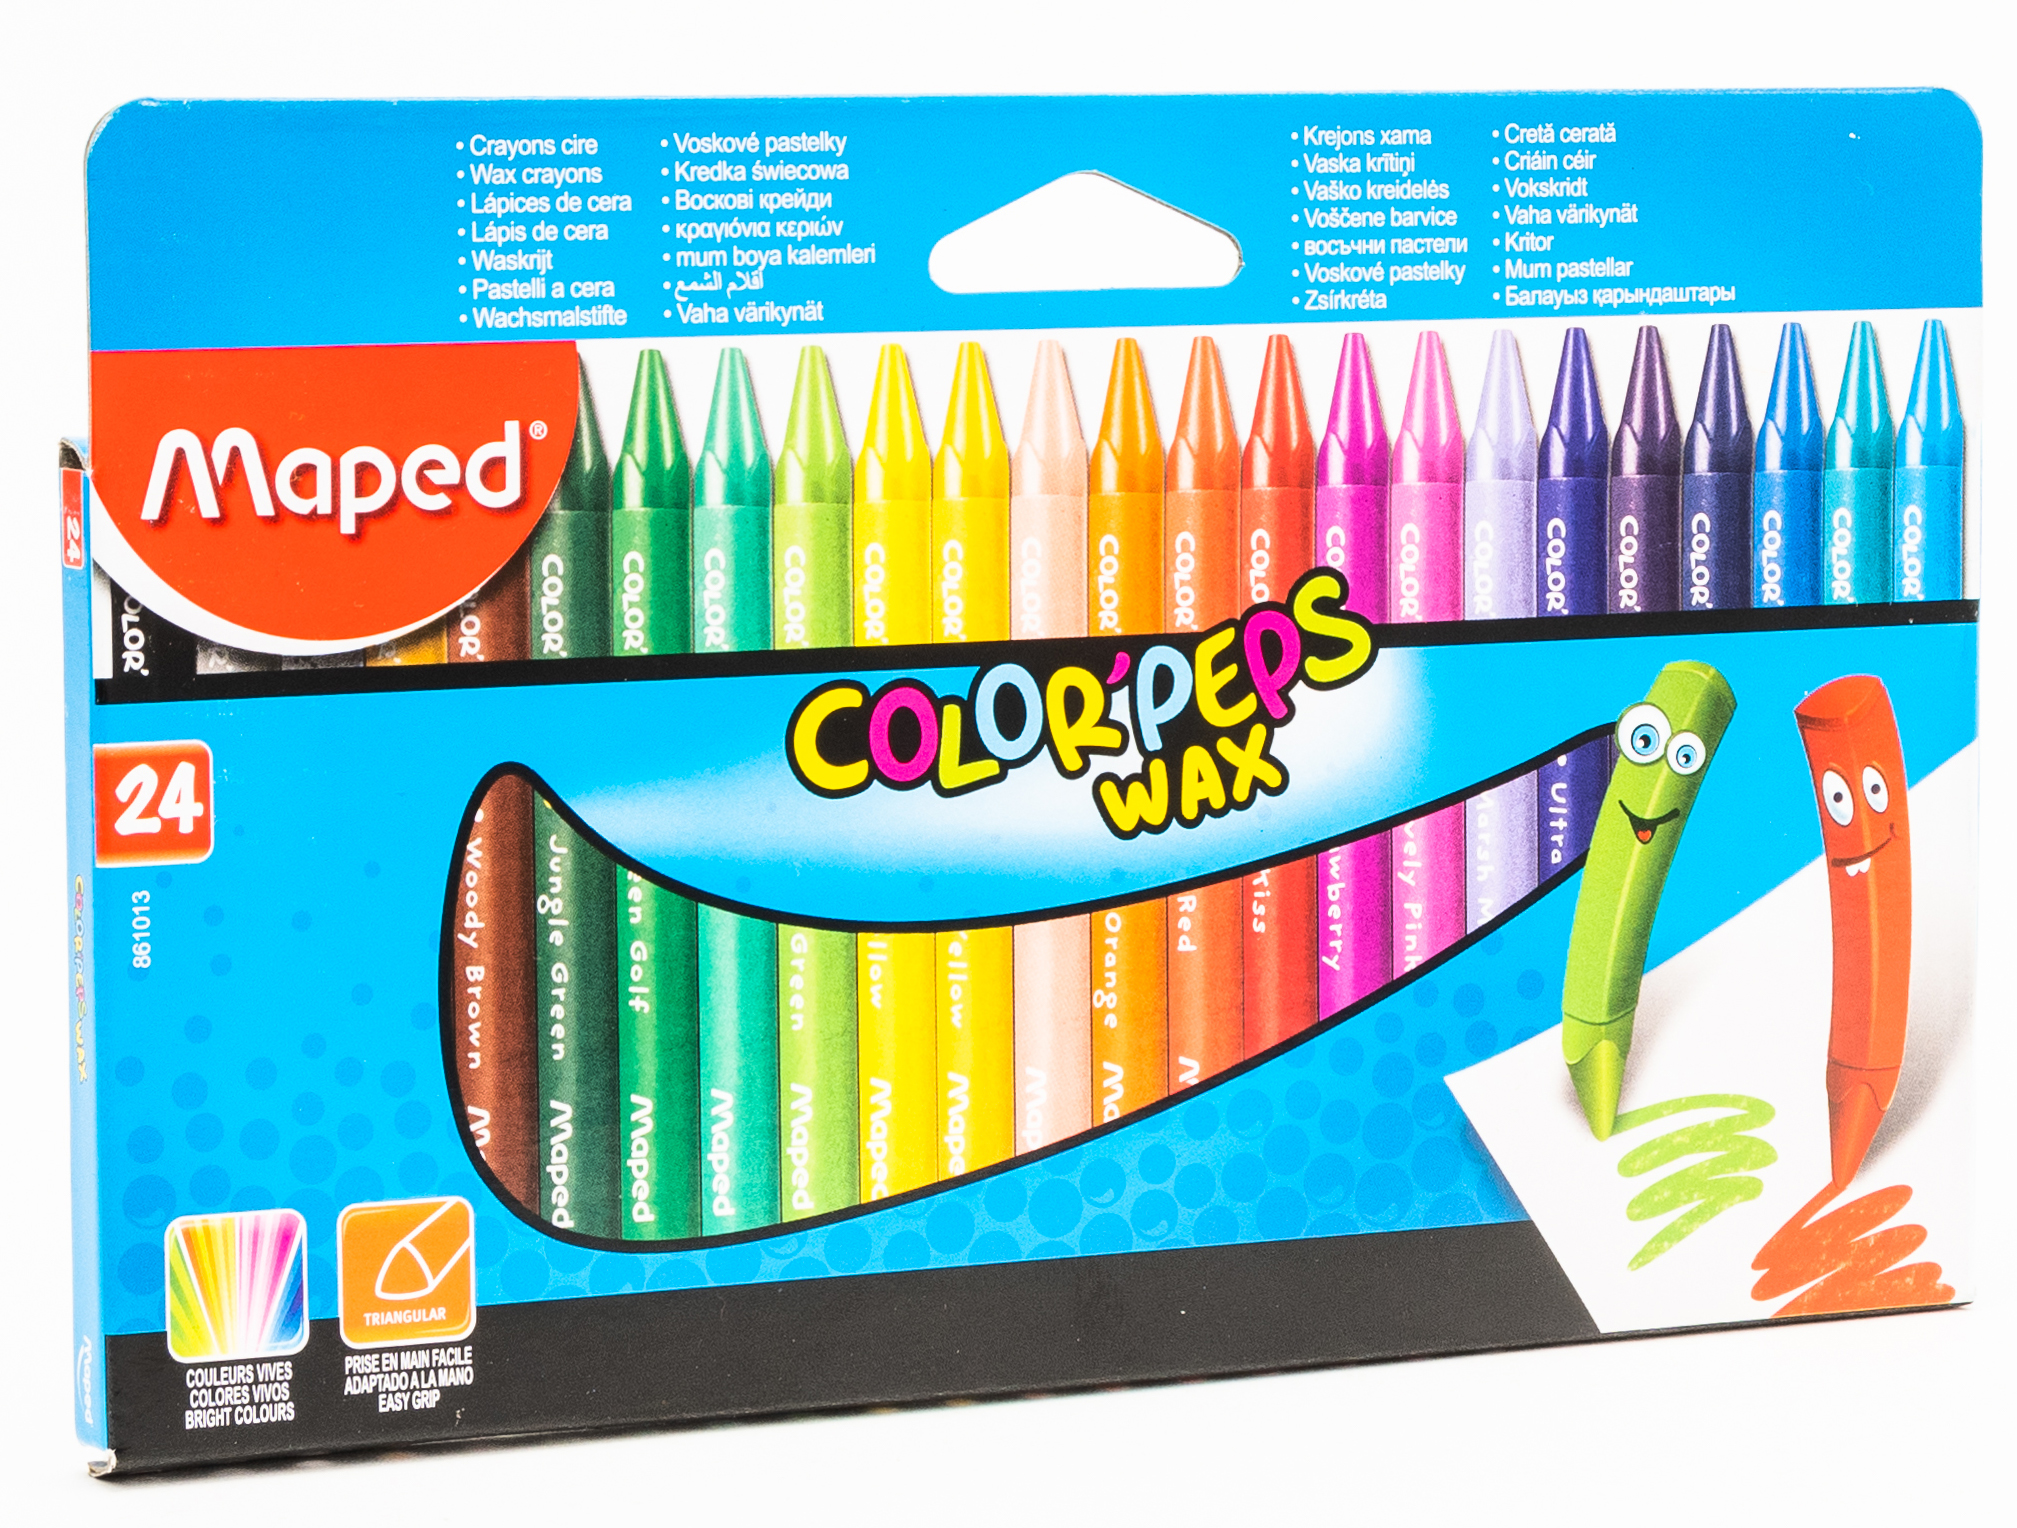 CRAYONS CIRE COLOR'PEPS WAX 24 COULEURS MAPED REF: 861013